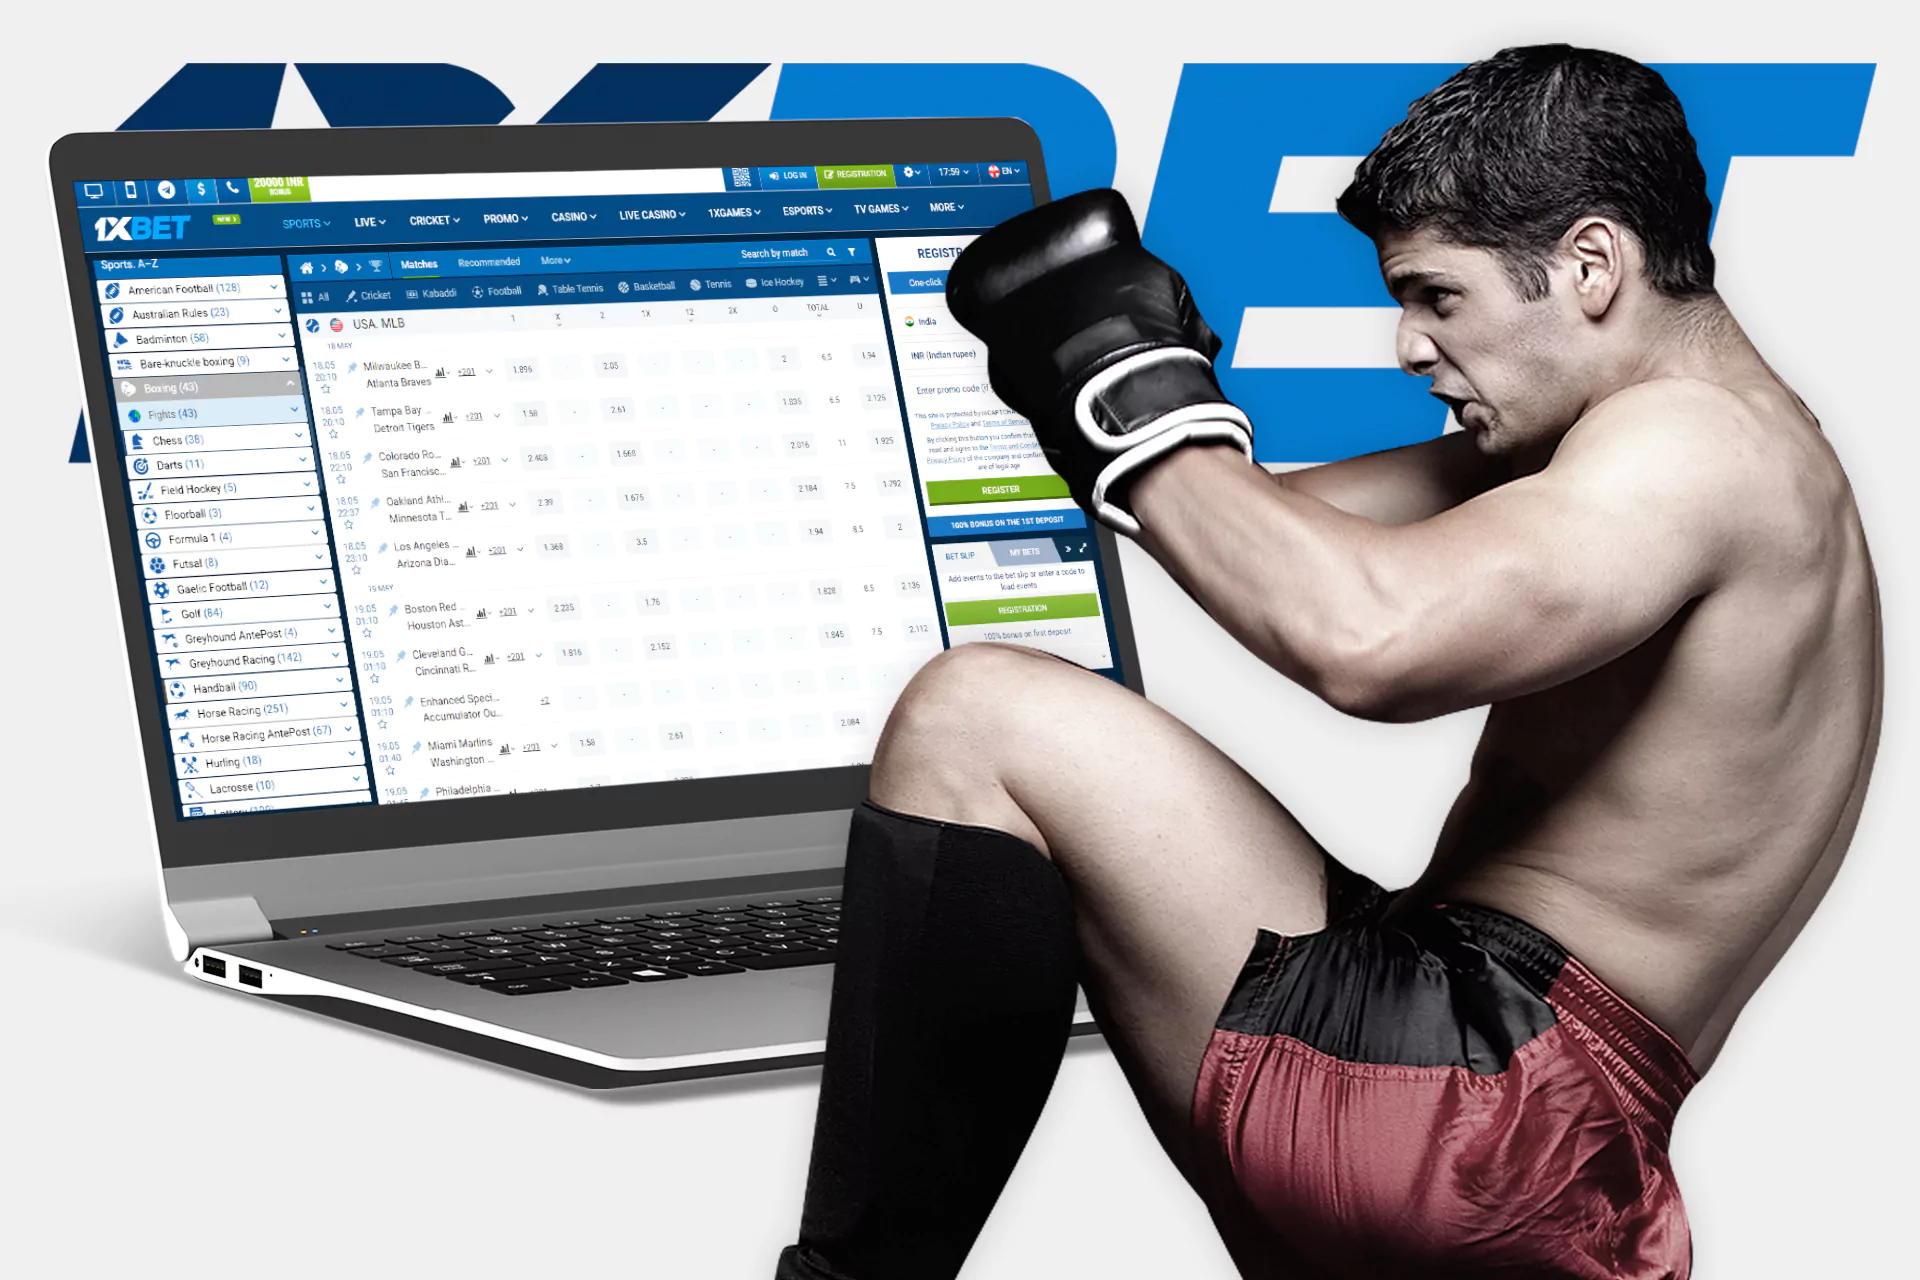 Place boxing bets at 1xBet after making a minimum deposit.